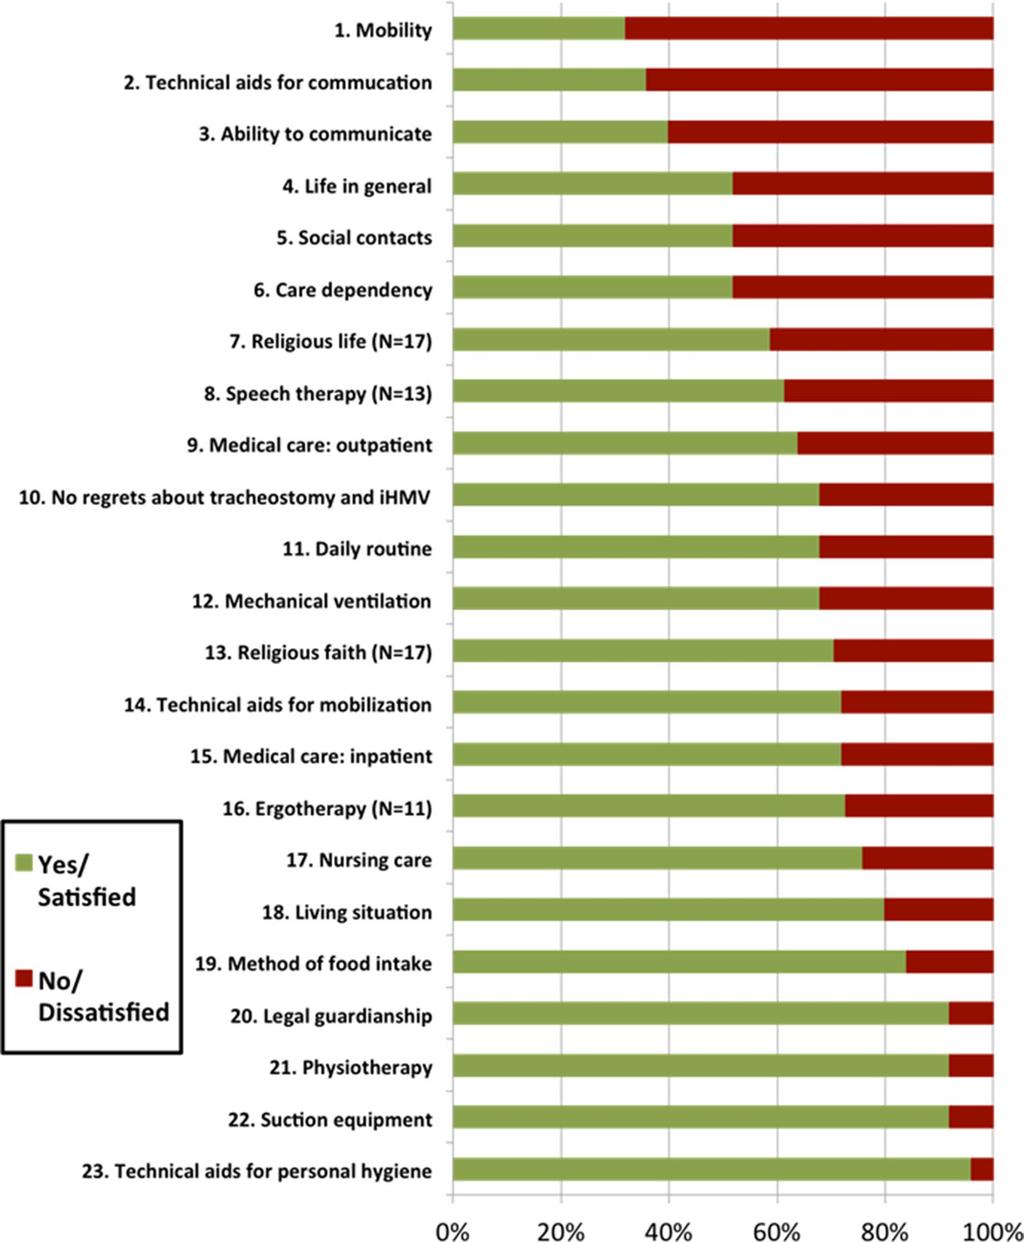 Page 5 of 9 Fig. 2 Subjective evaluation of life satisfaction in relation to 23 specific aspects of life in ascending order.